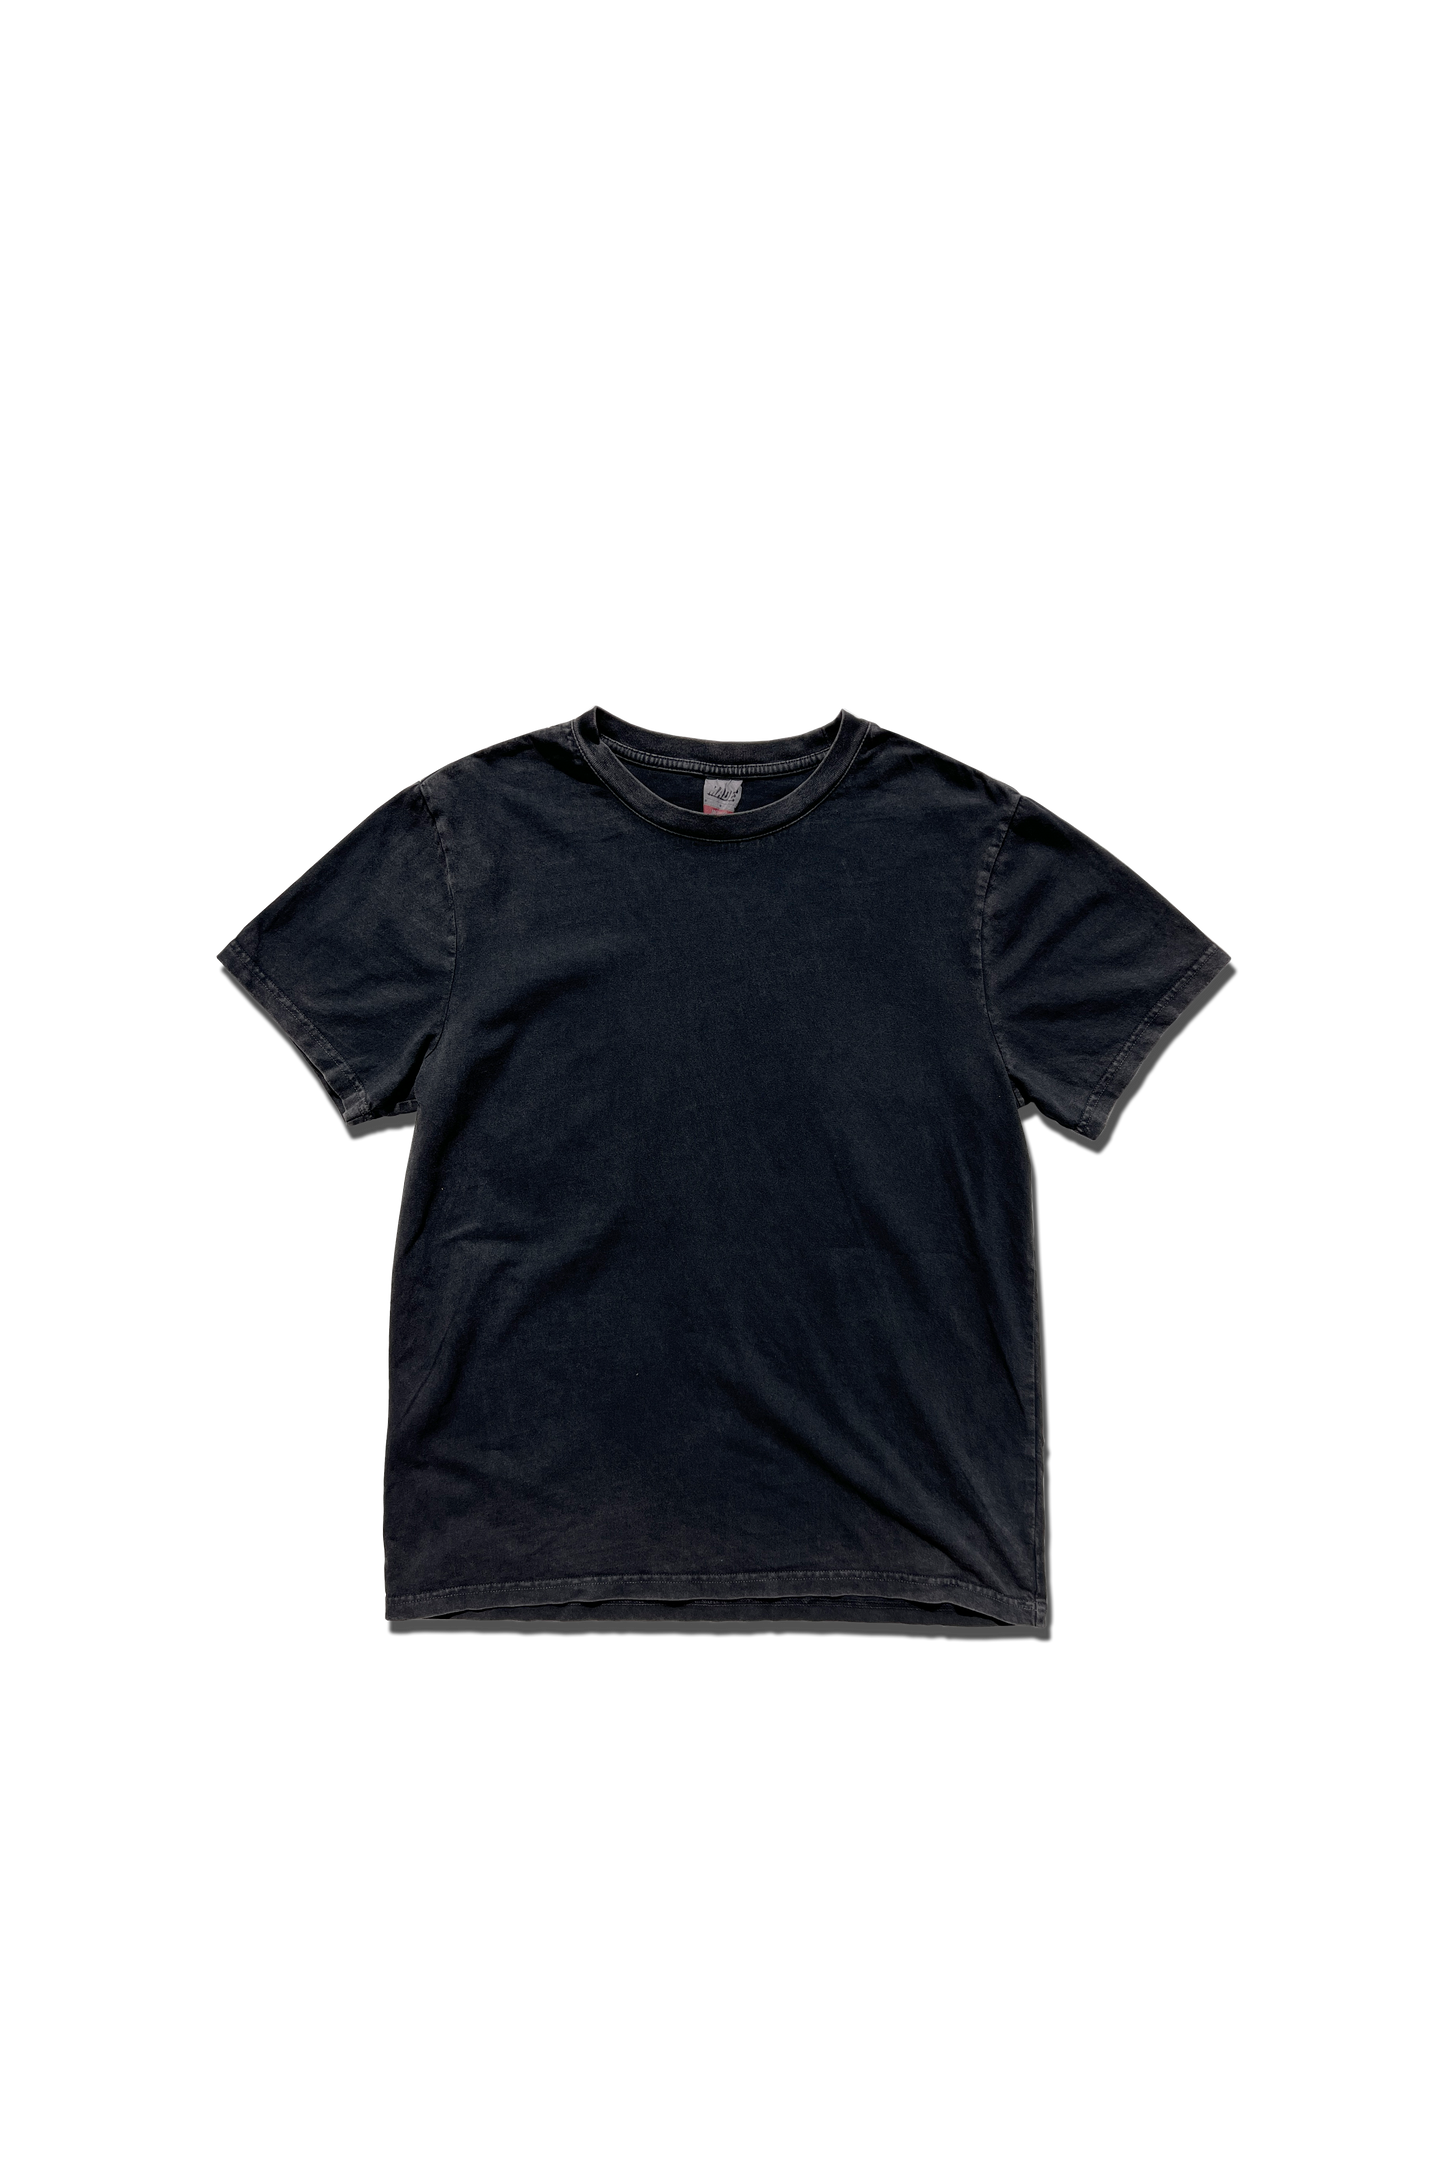 Exclusive Major T-Shirt - Stone Mineral Black